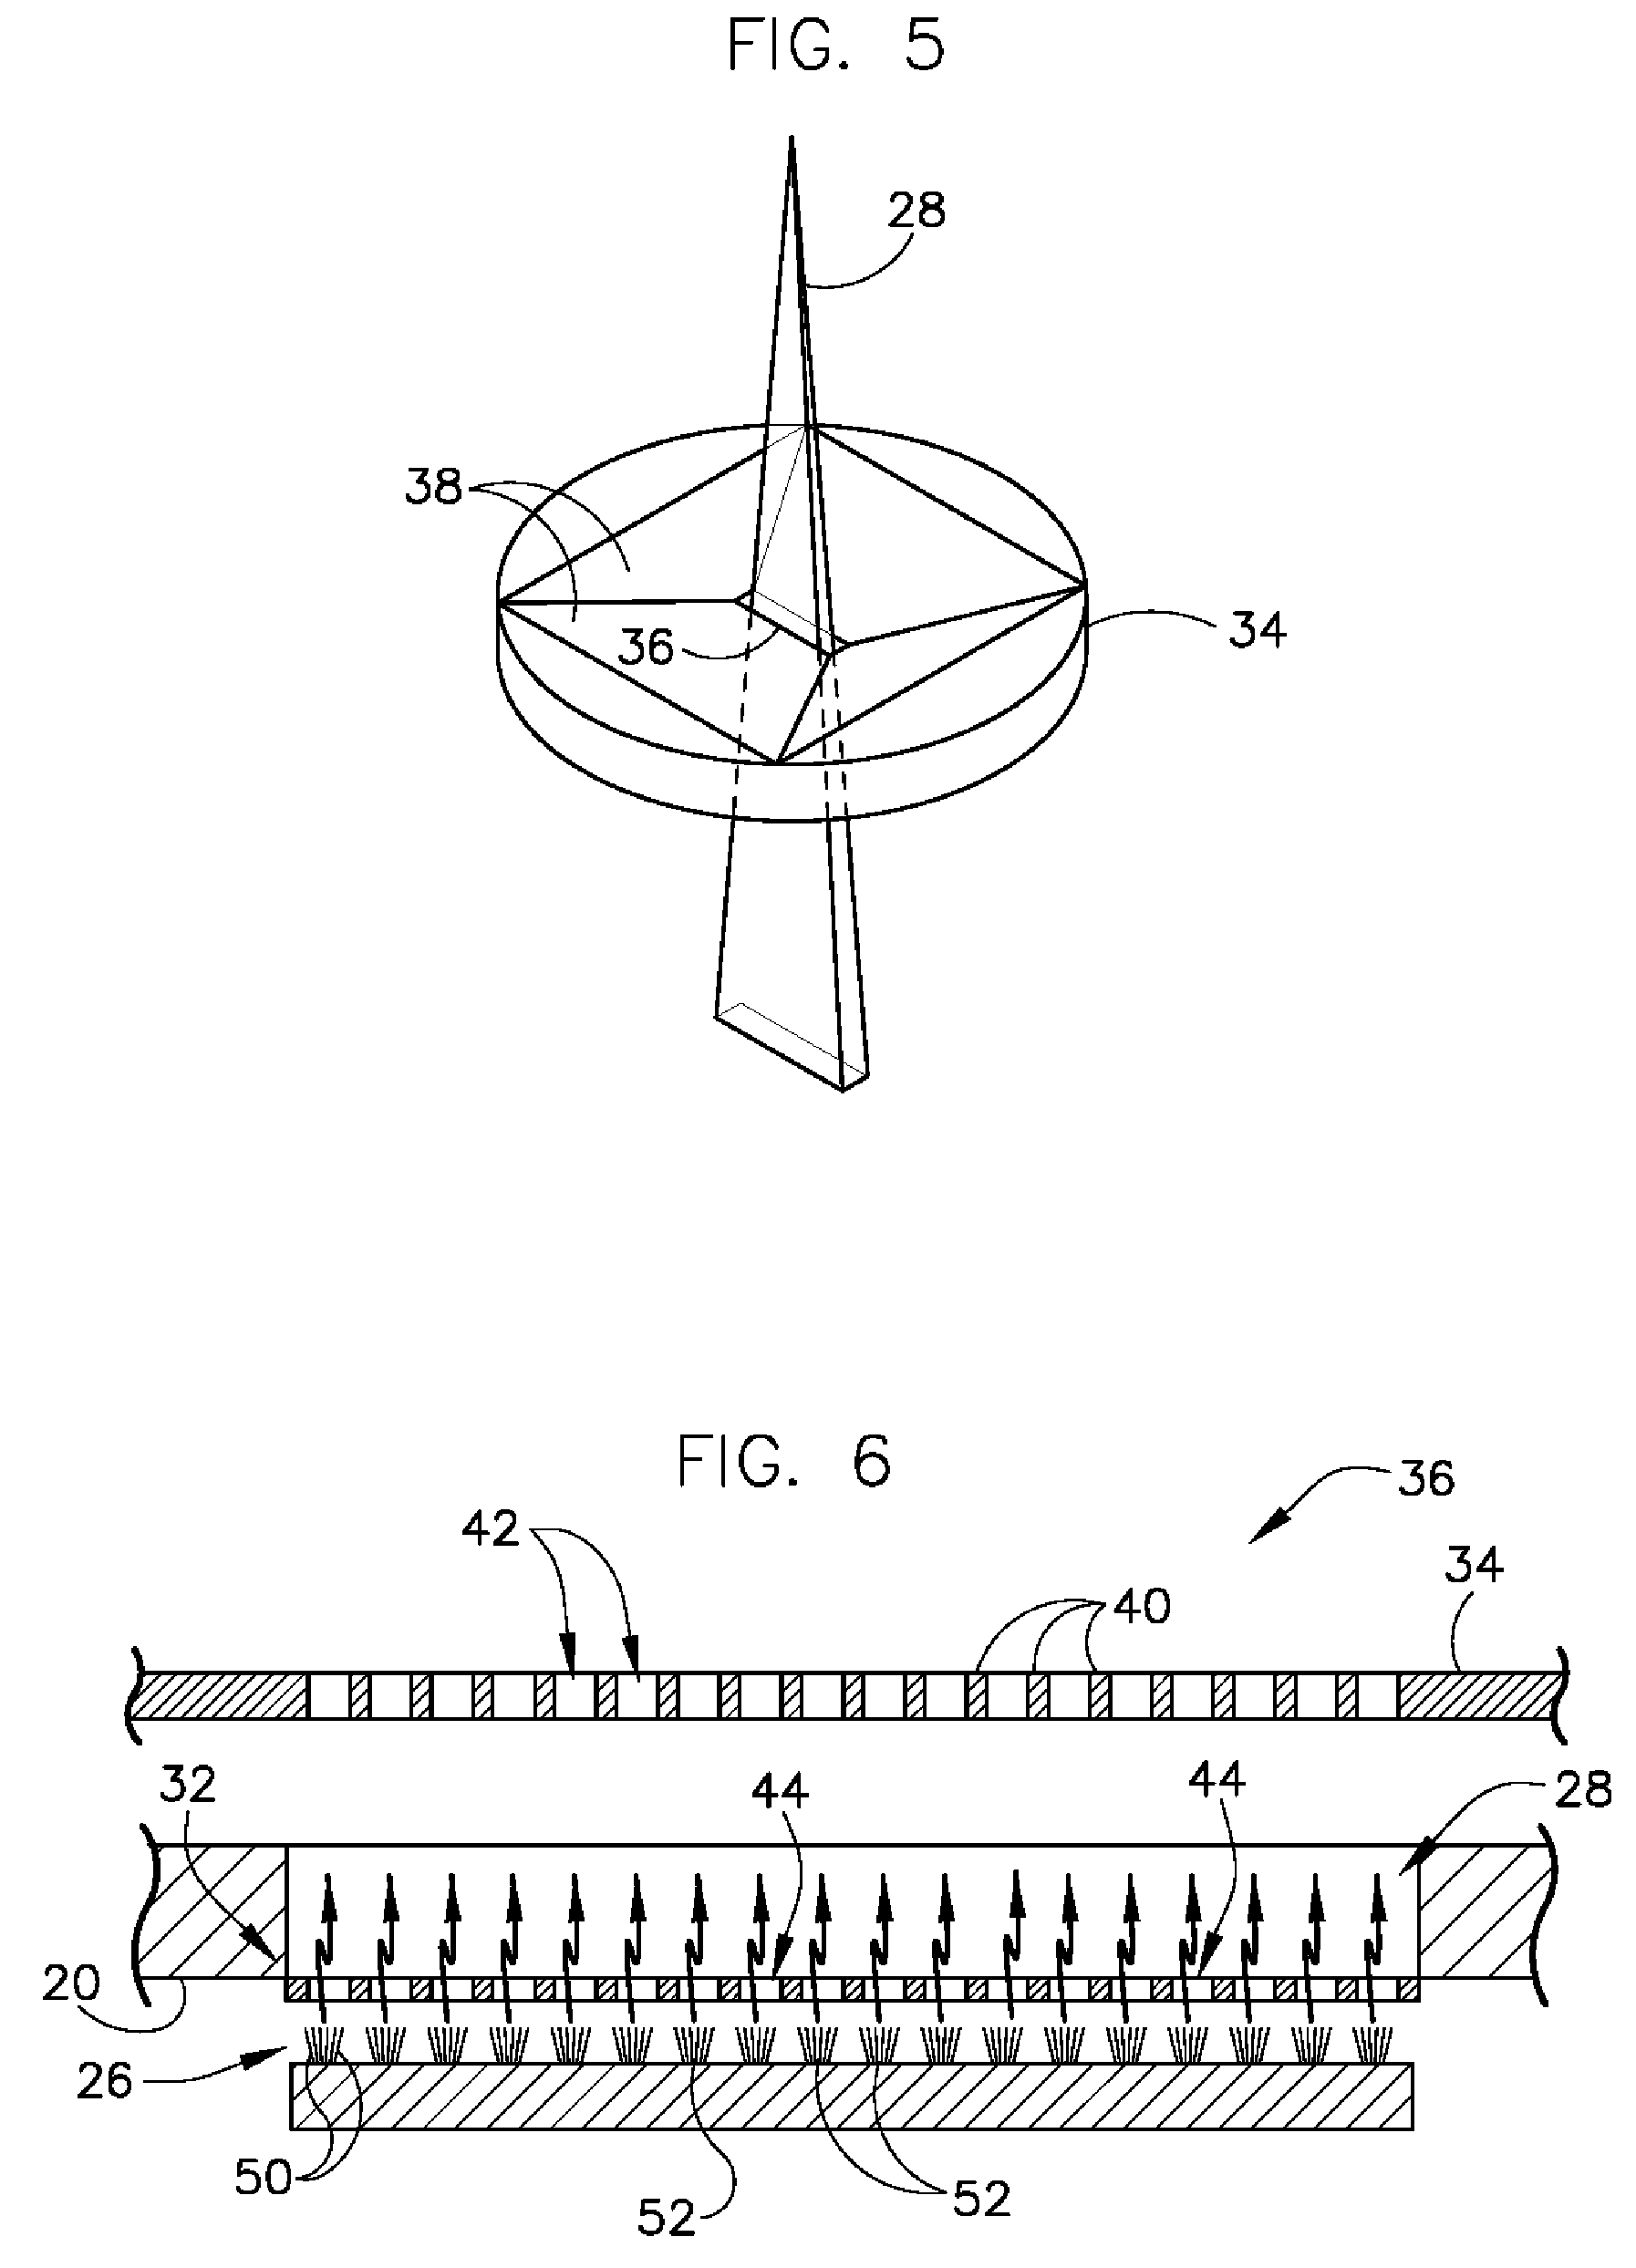 Field emitter based electron source with minimized beam emittance growth